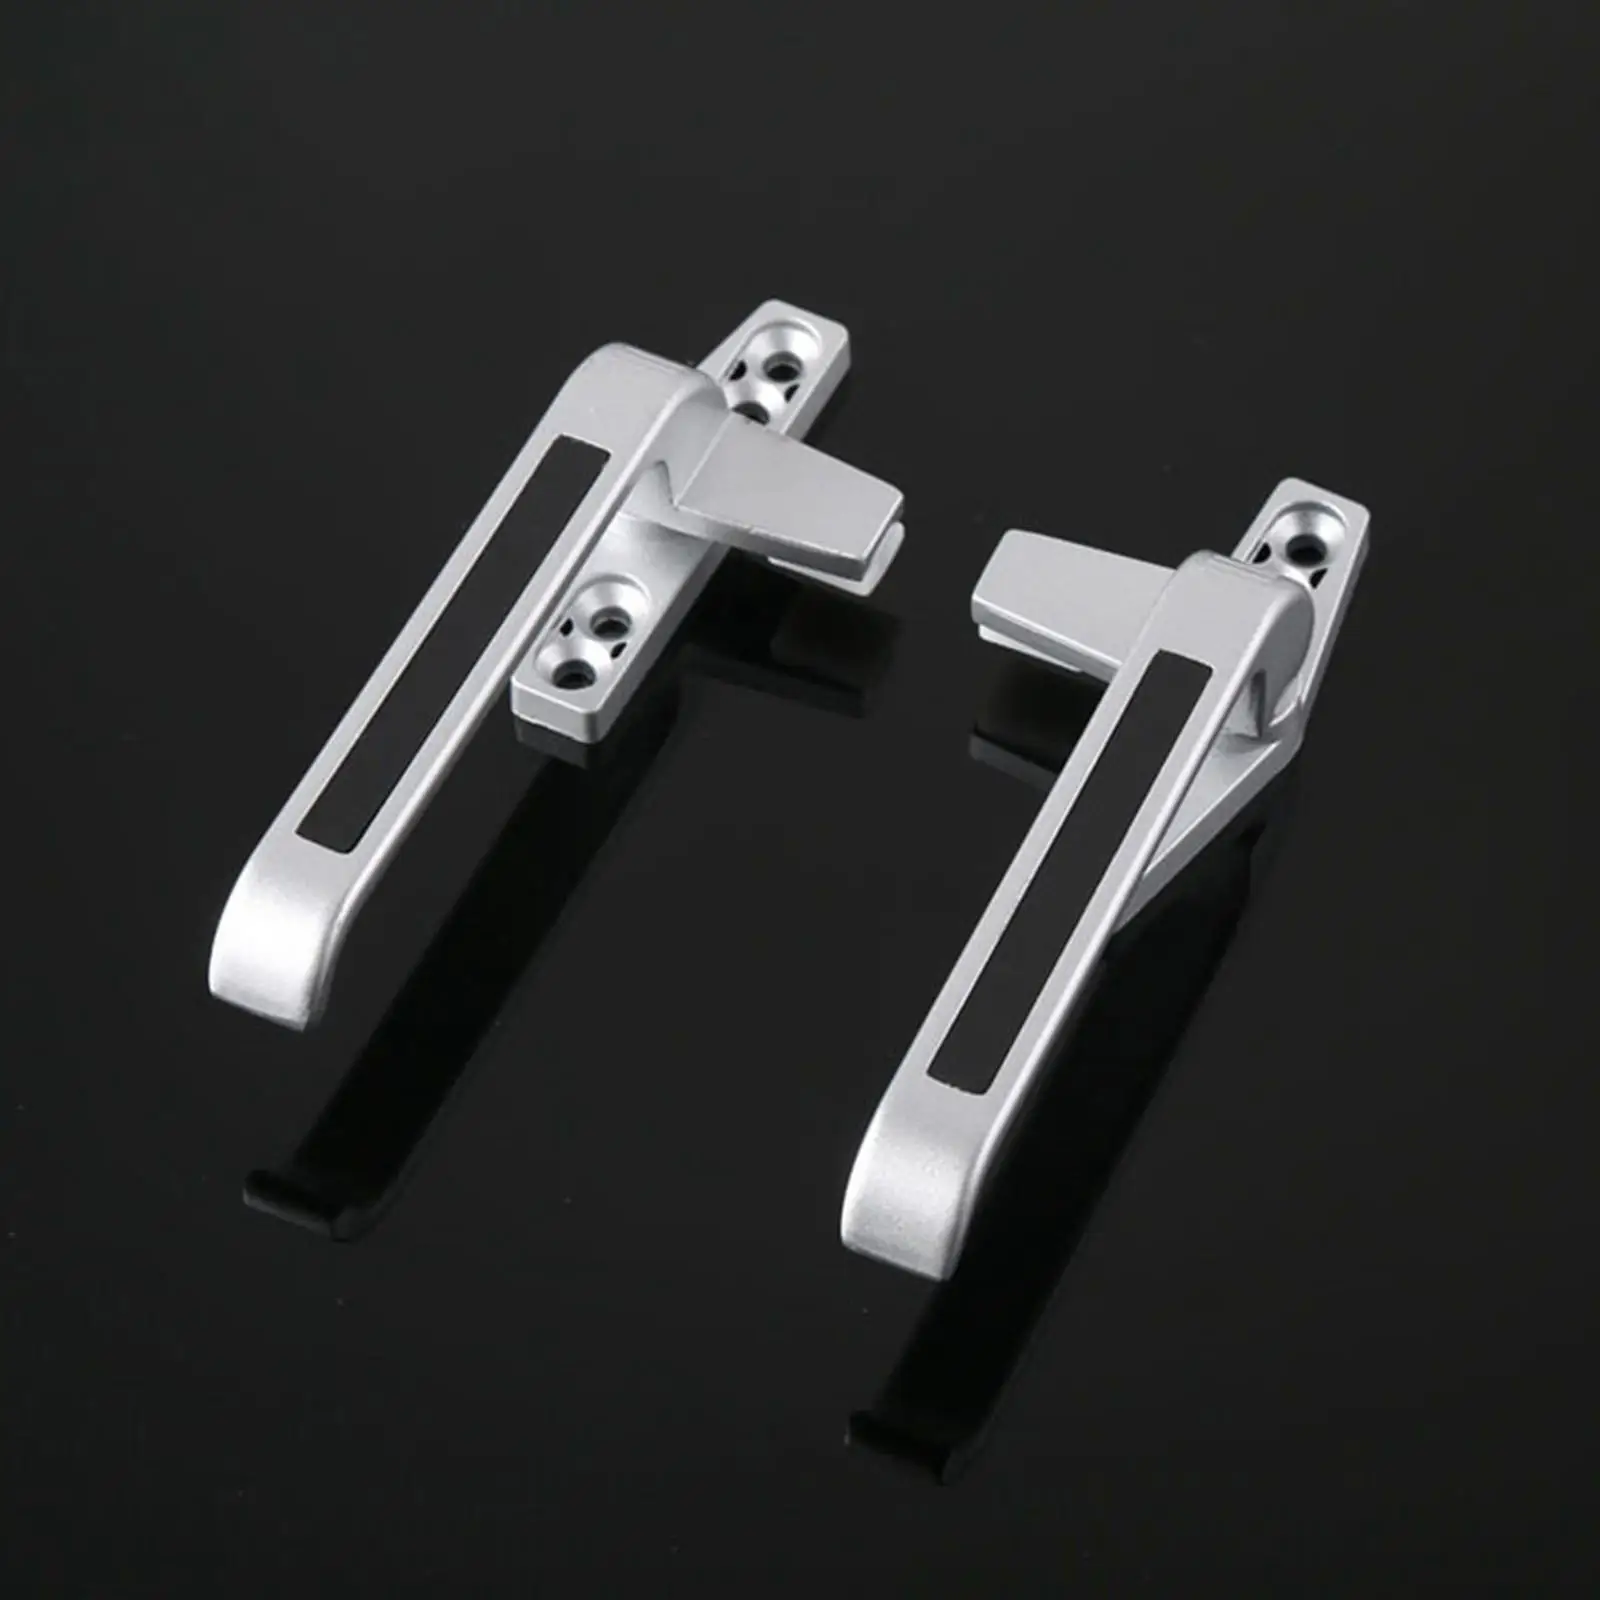 2x Zinc Alloy Window Handle Locking Replacement Support Left Right Hand for Bathroom